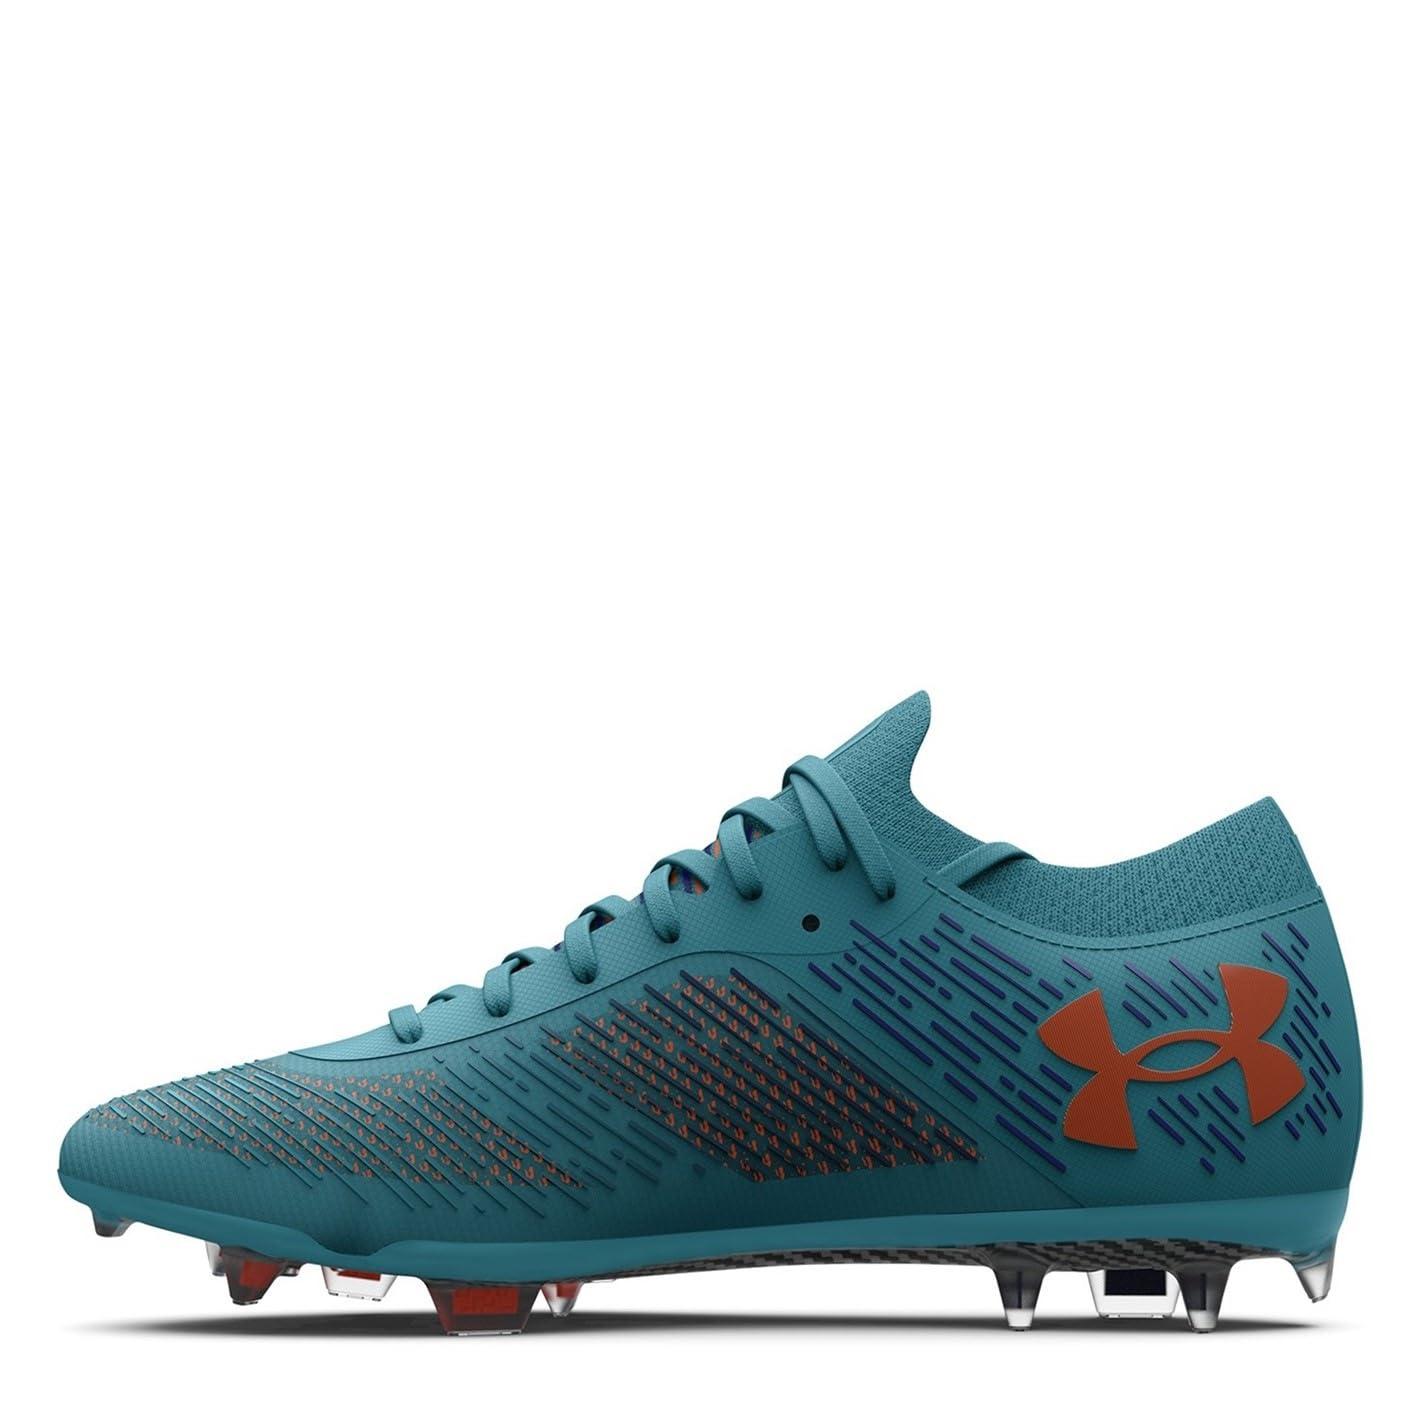 Under Armour S Shadow Elite Fg Football Boots Blue 11 Uk for Men | Lyst UK